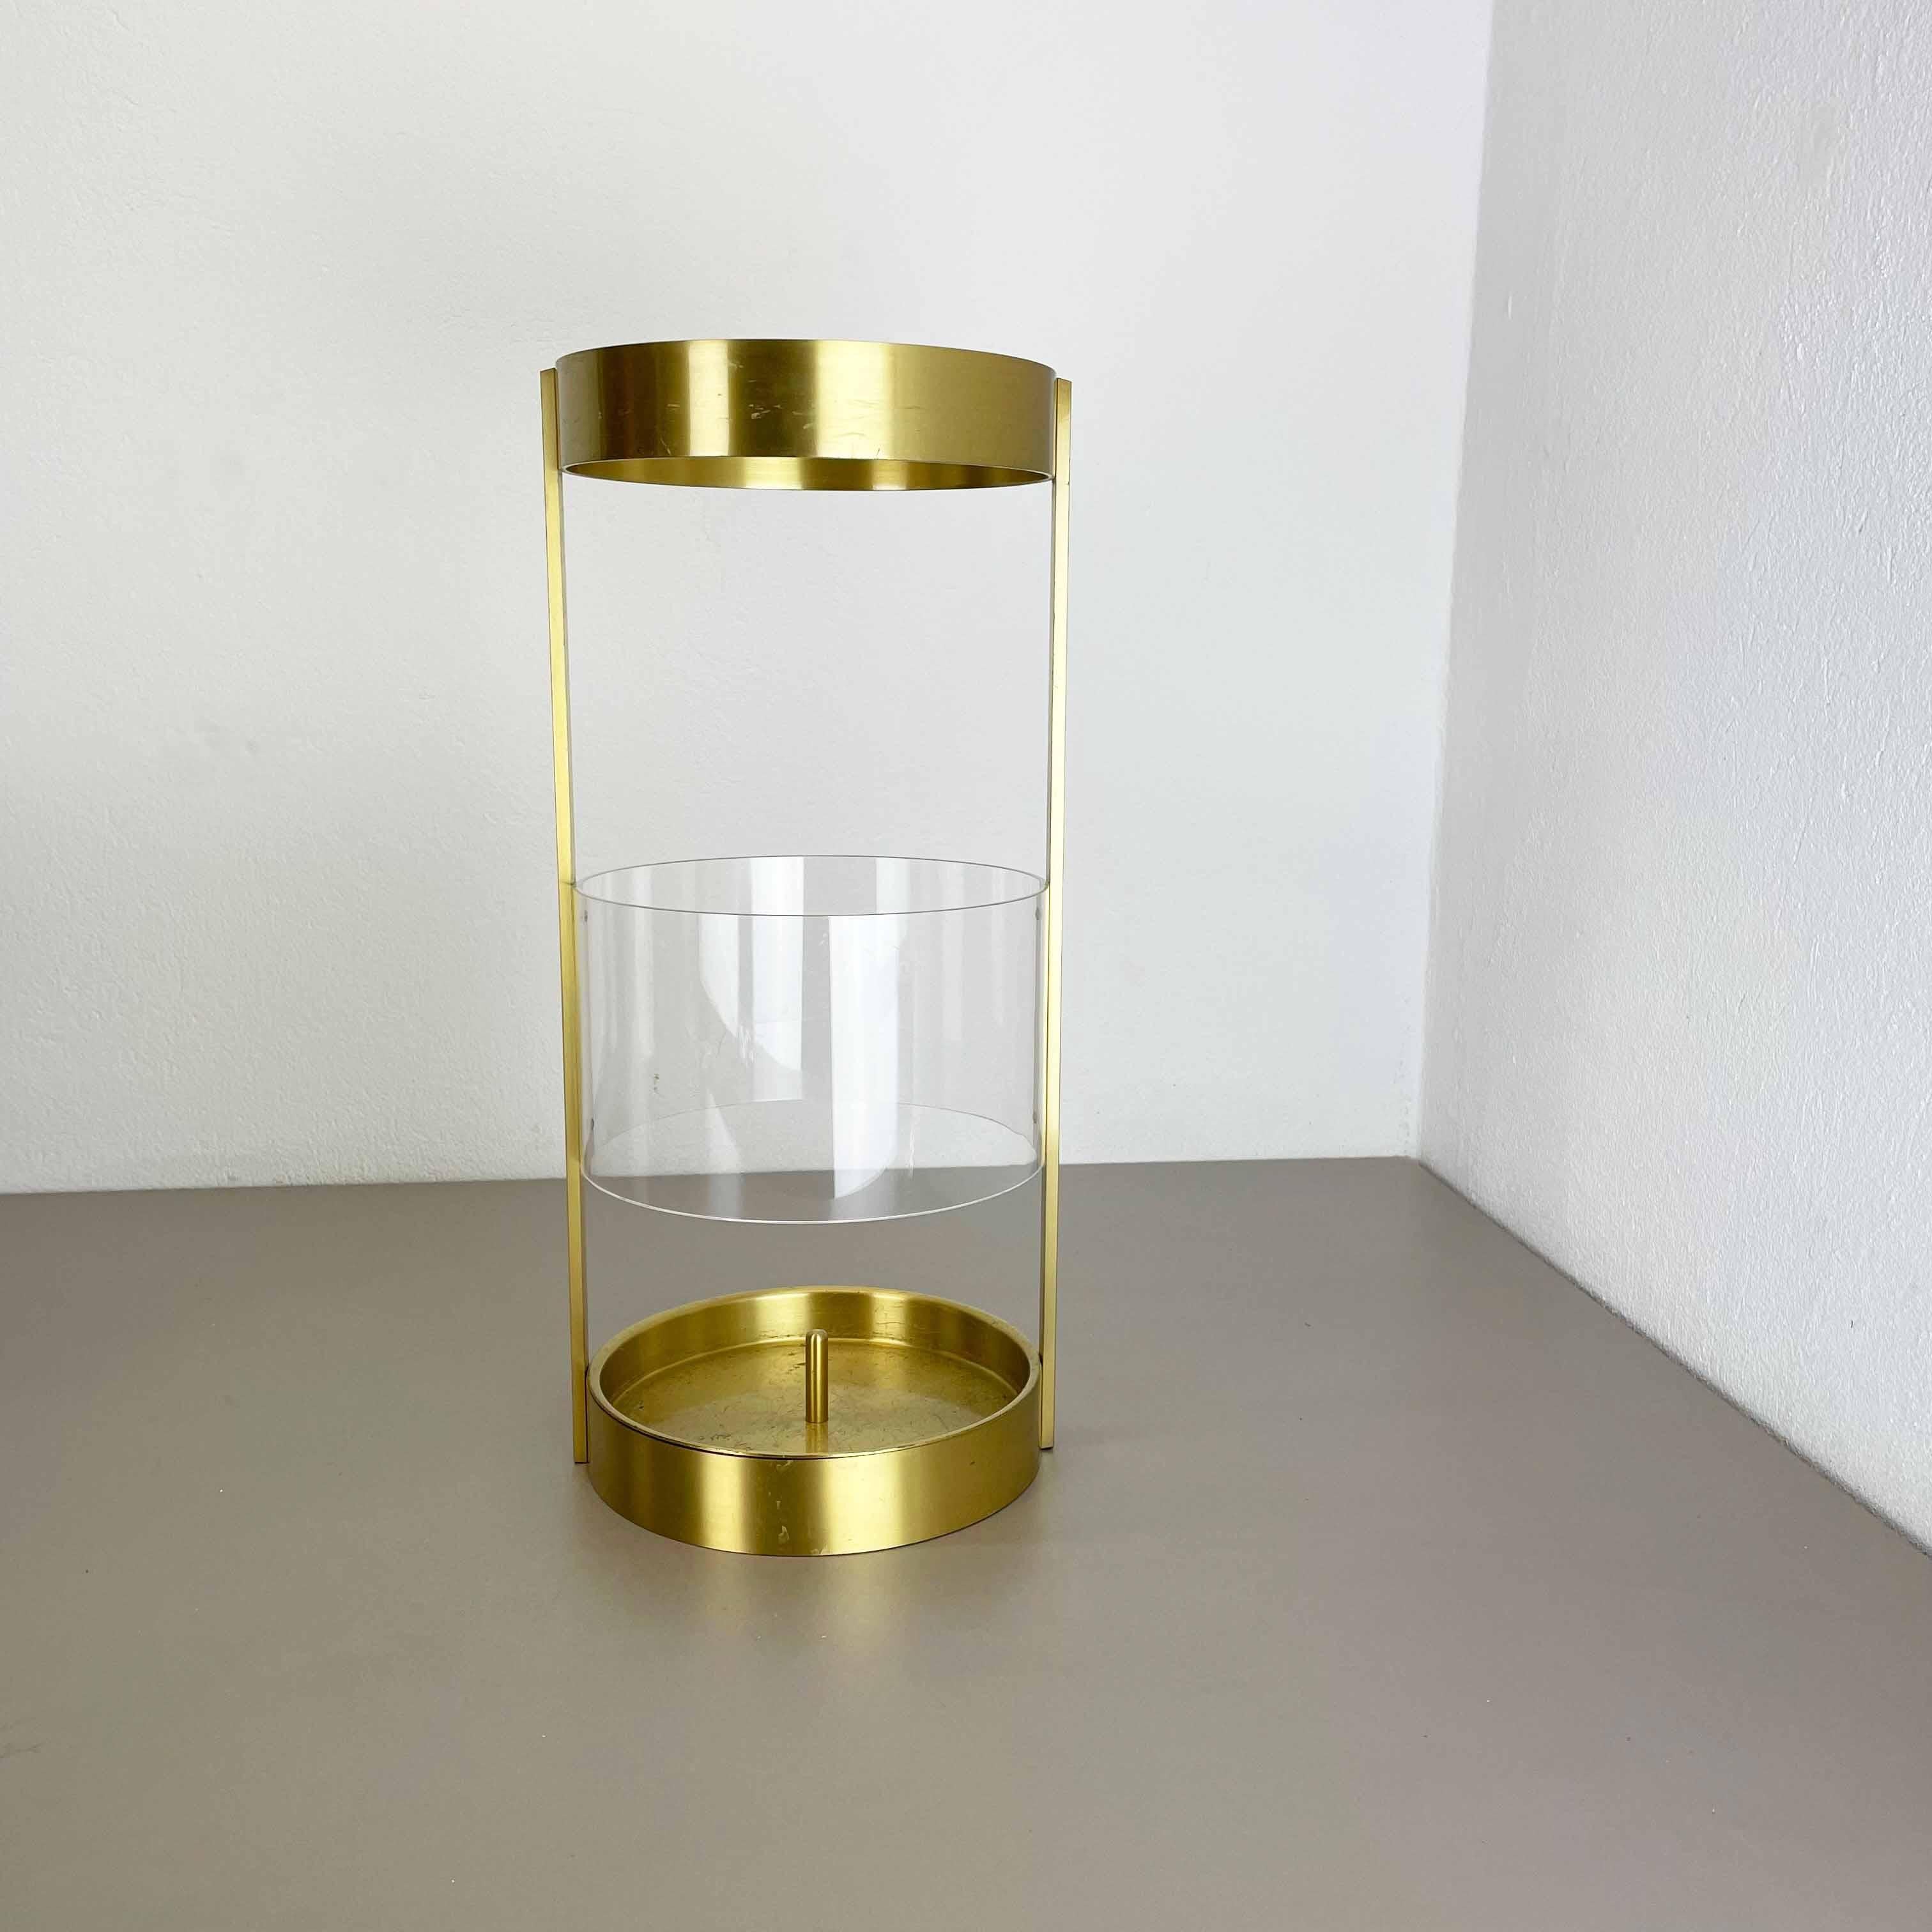 Original Hollywood Regency Solid Brass Acryl Glass Umbrella Stand, Italy, 1970s For Sale 13